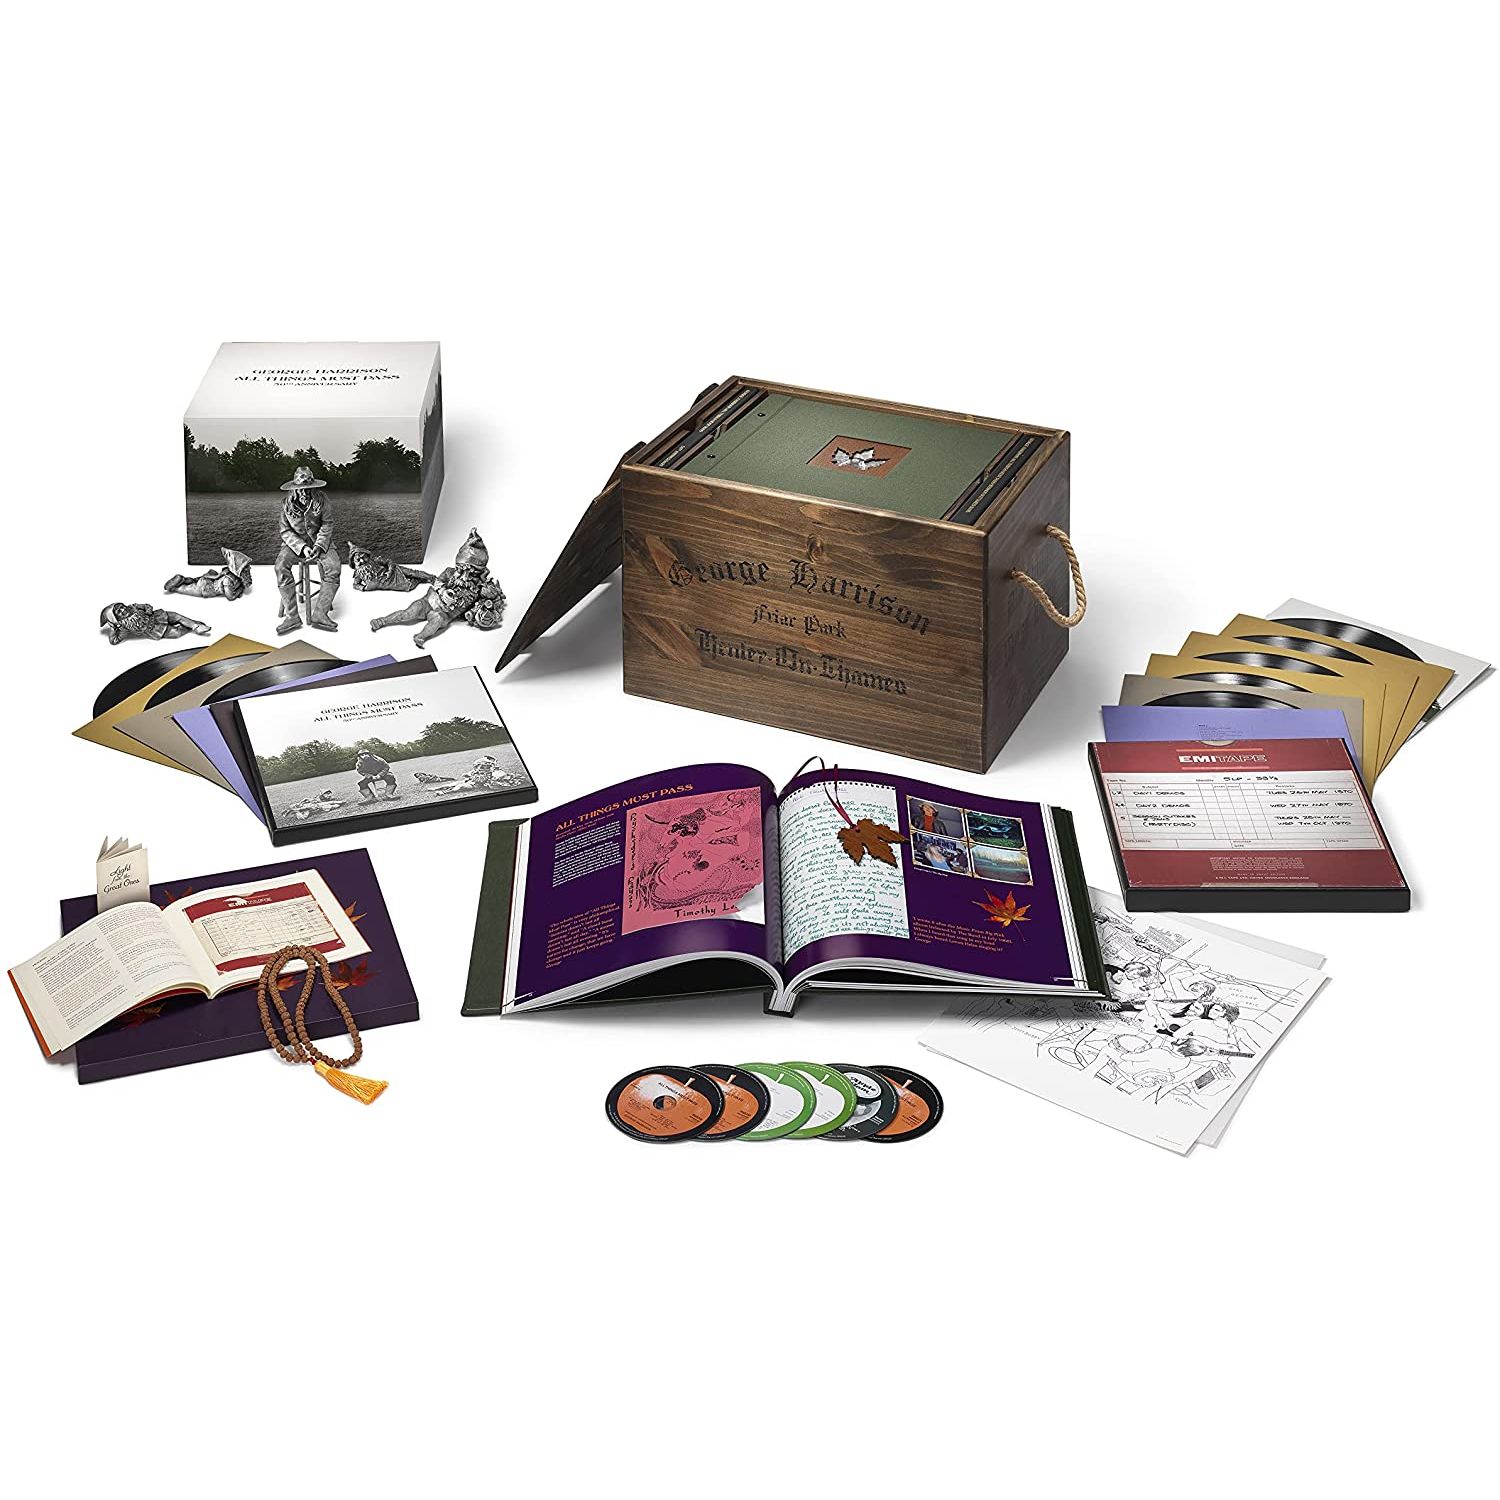 GEORGE HARRISON / ジョージ・ハリスン / ALL THINGS MUST PASS (UBER DELUXE BOX SET)